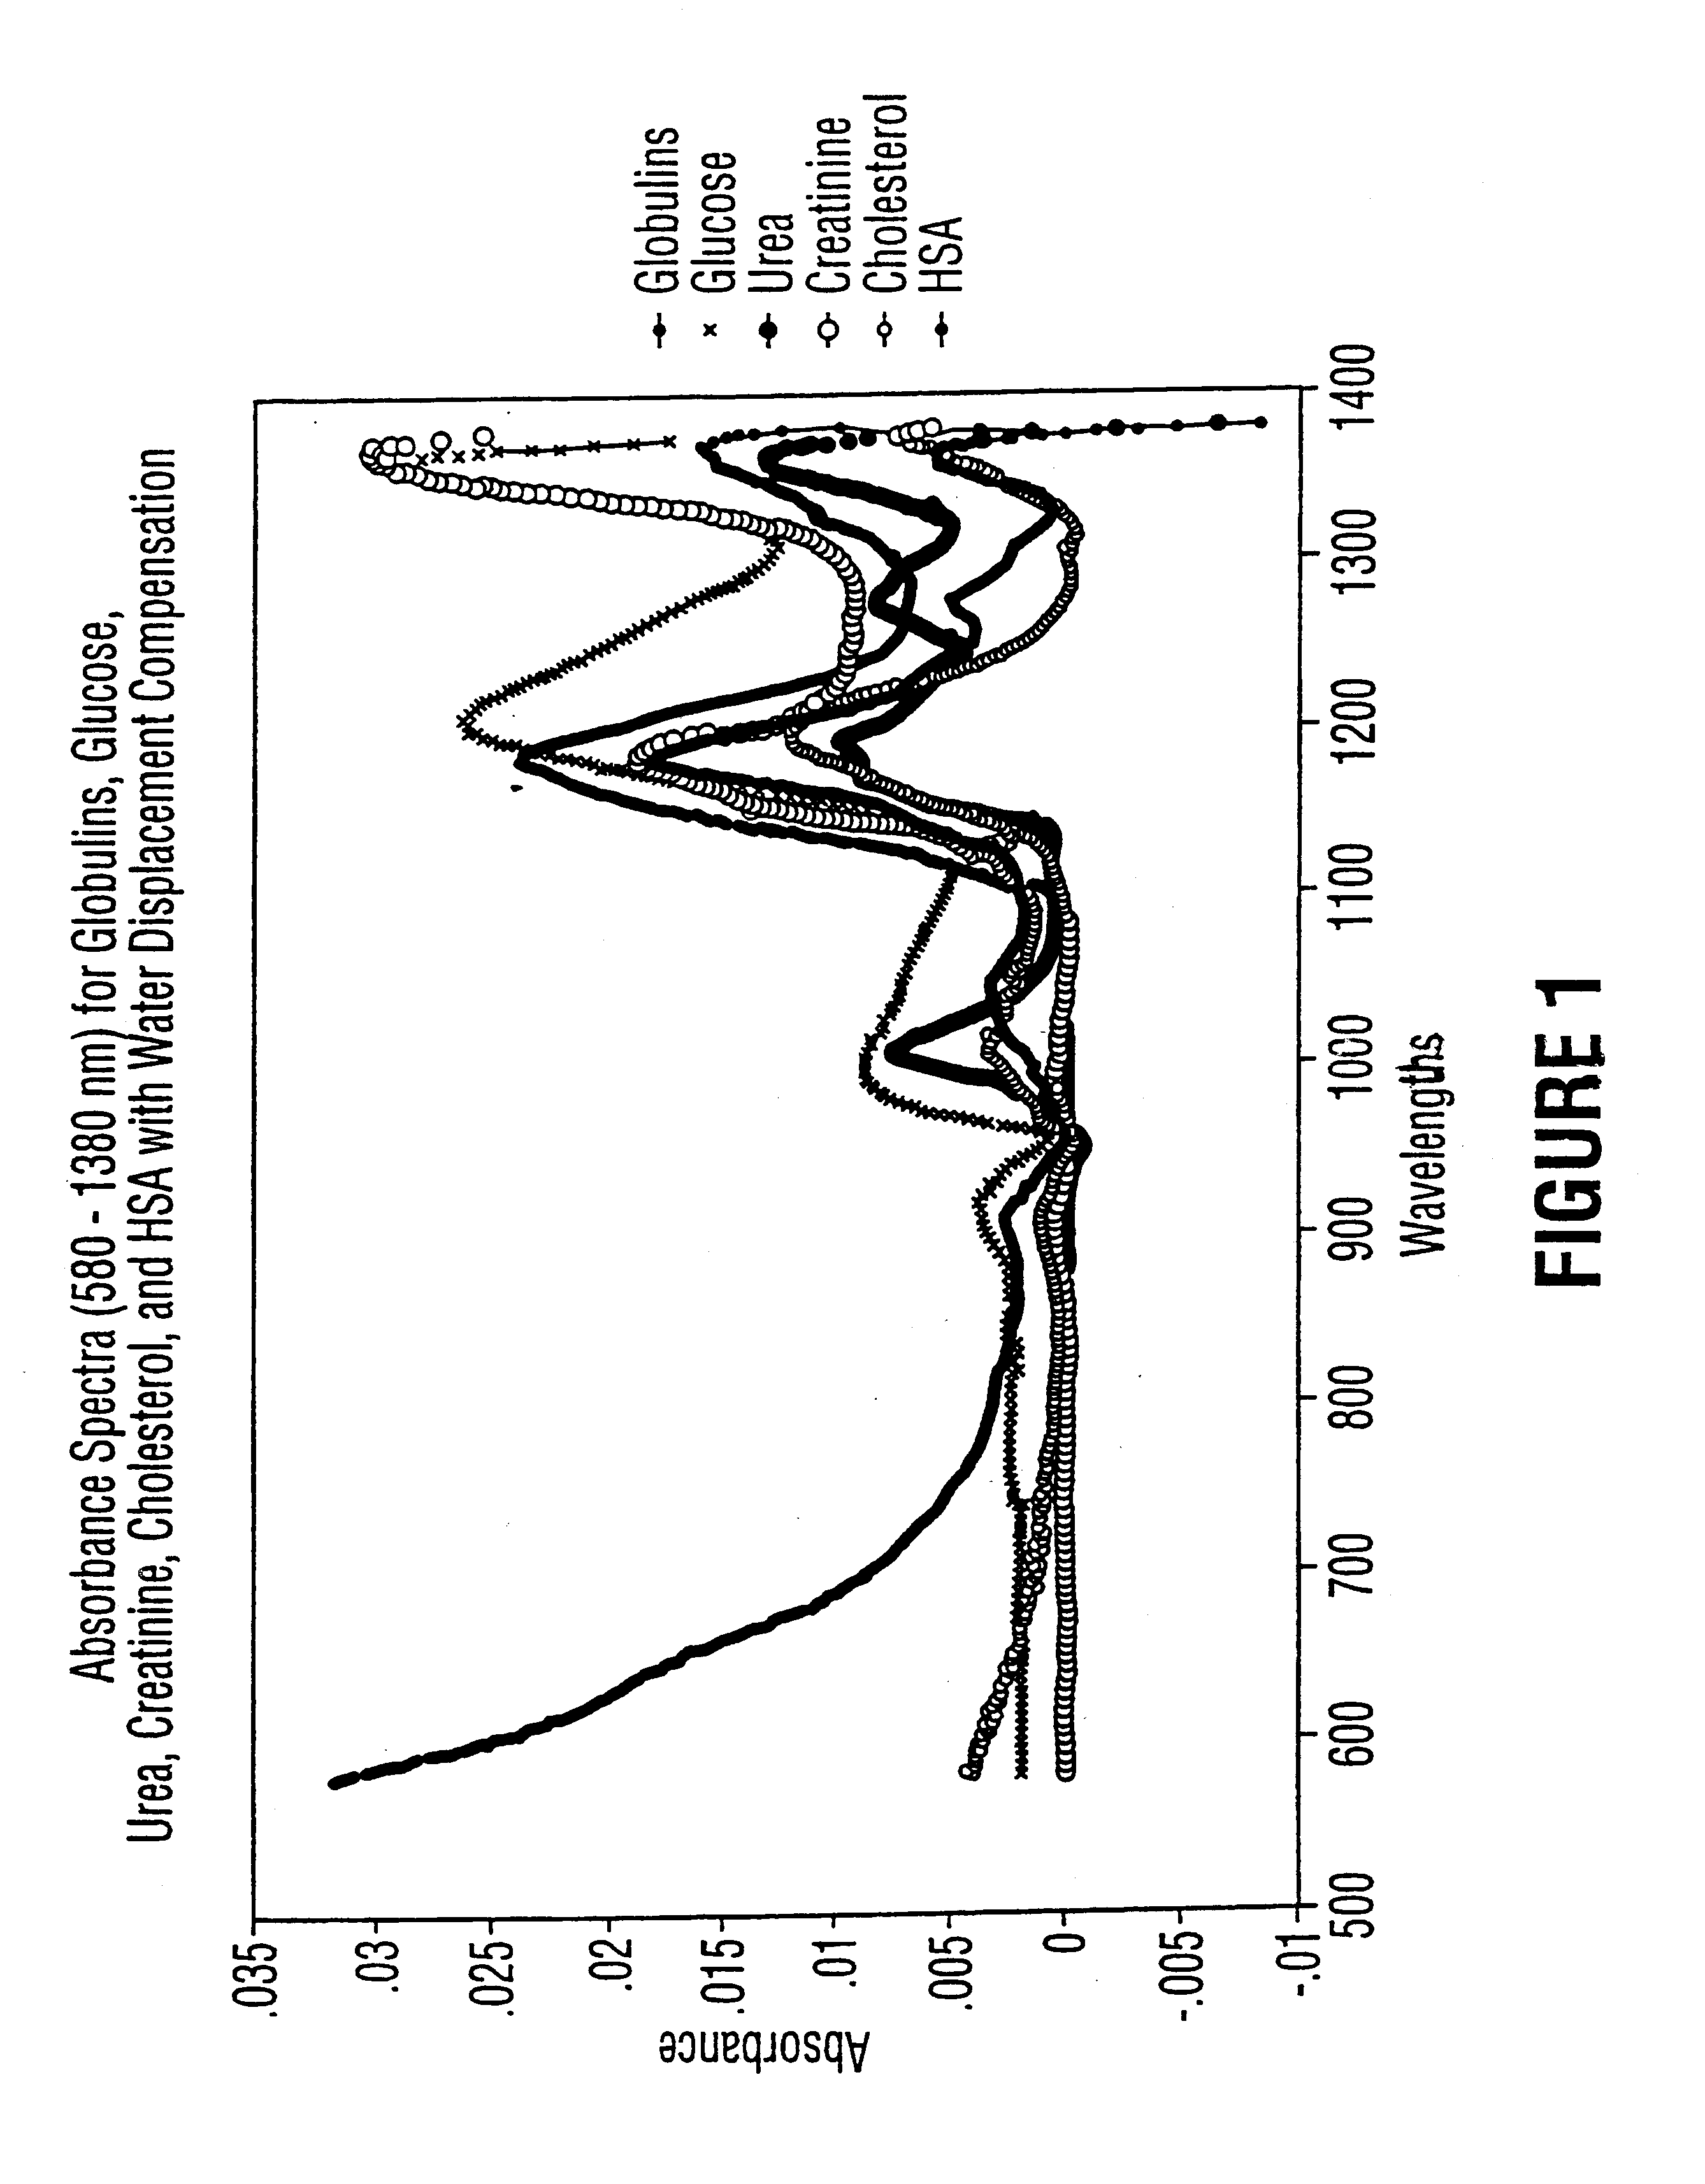 Method for determination of analytes using near infrared, adjacent visible spectrum and an array of longer near infrared wavelengths